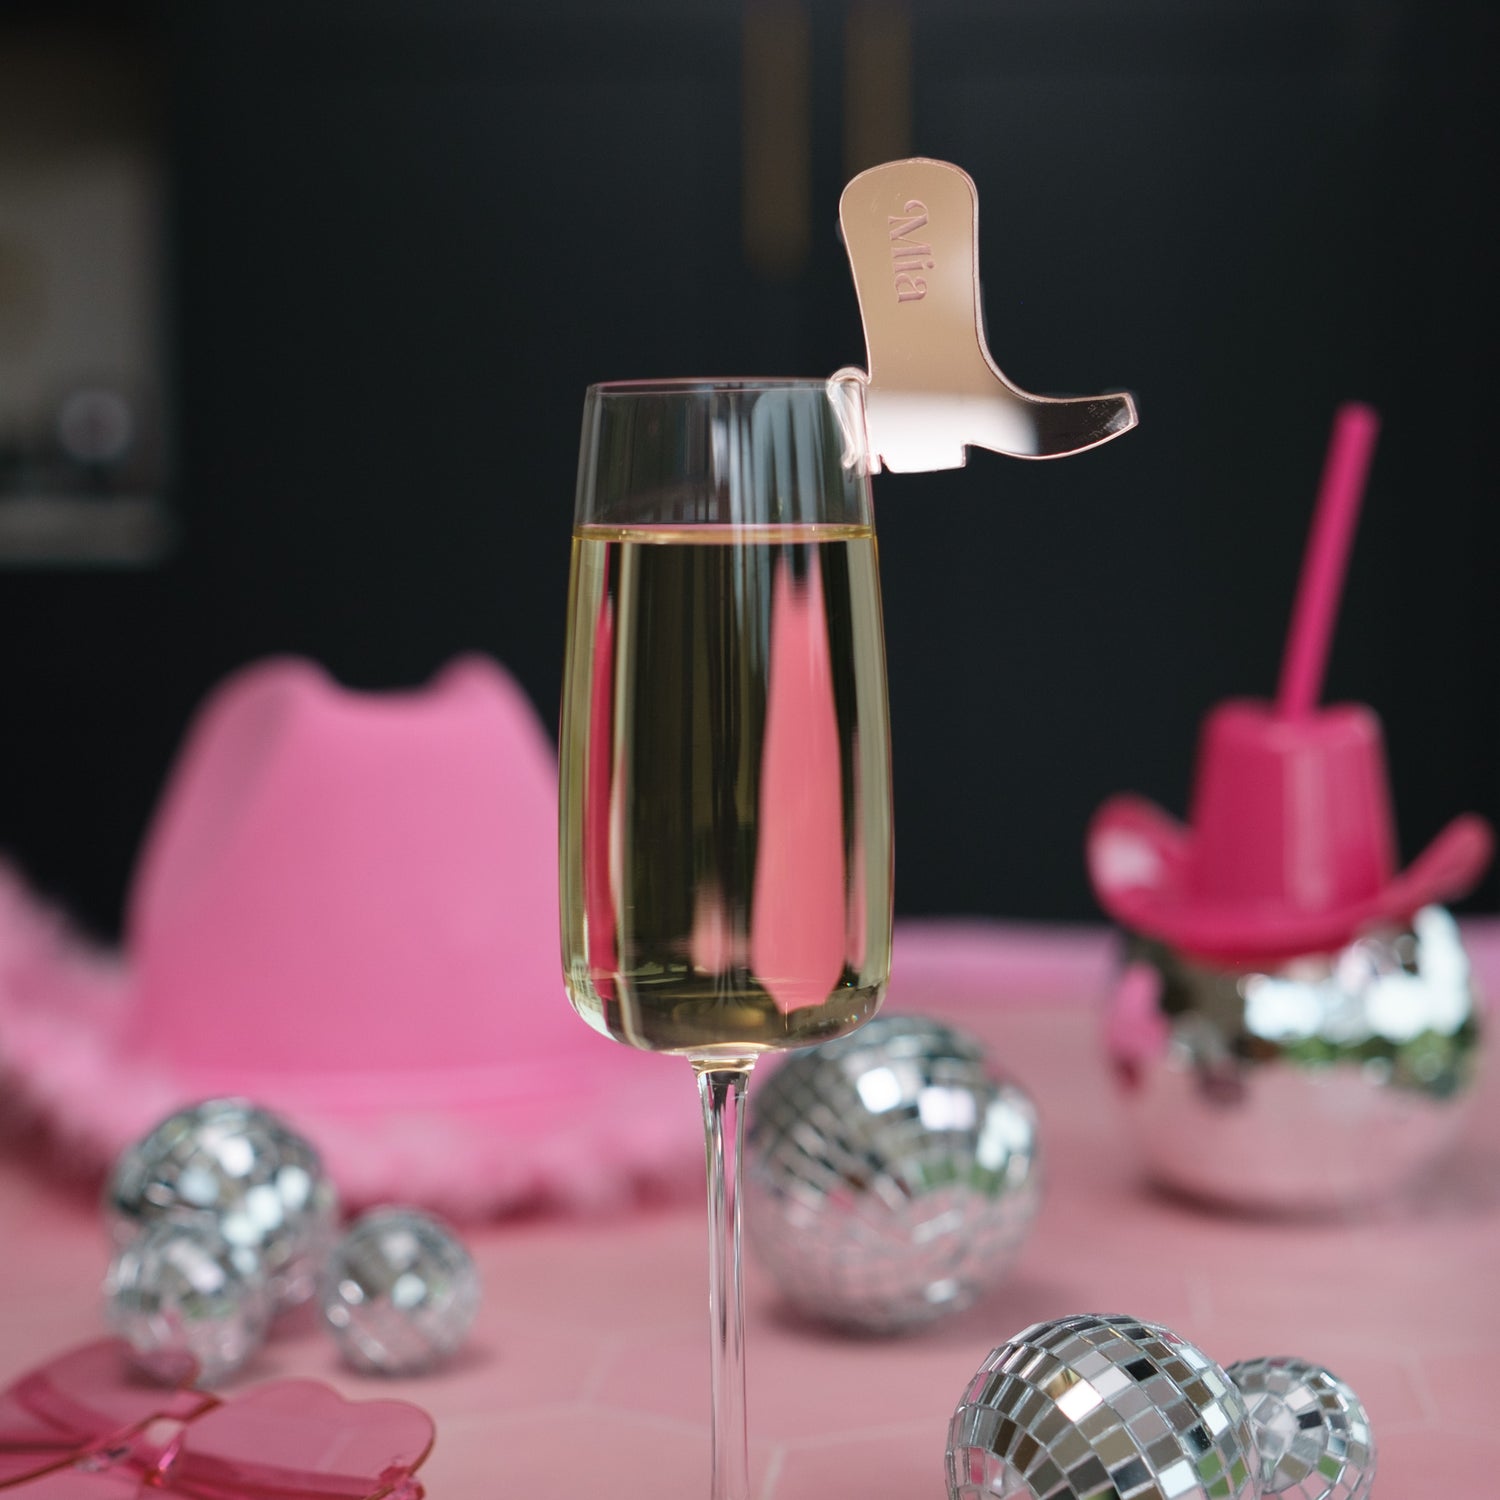 Hen party decorations